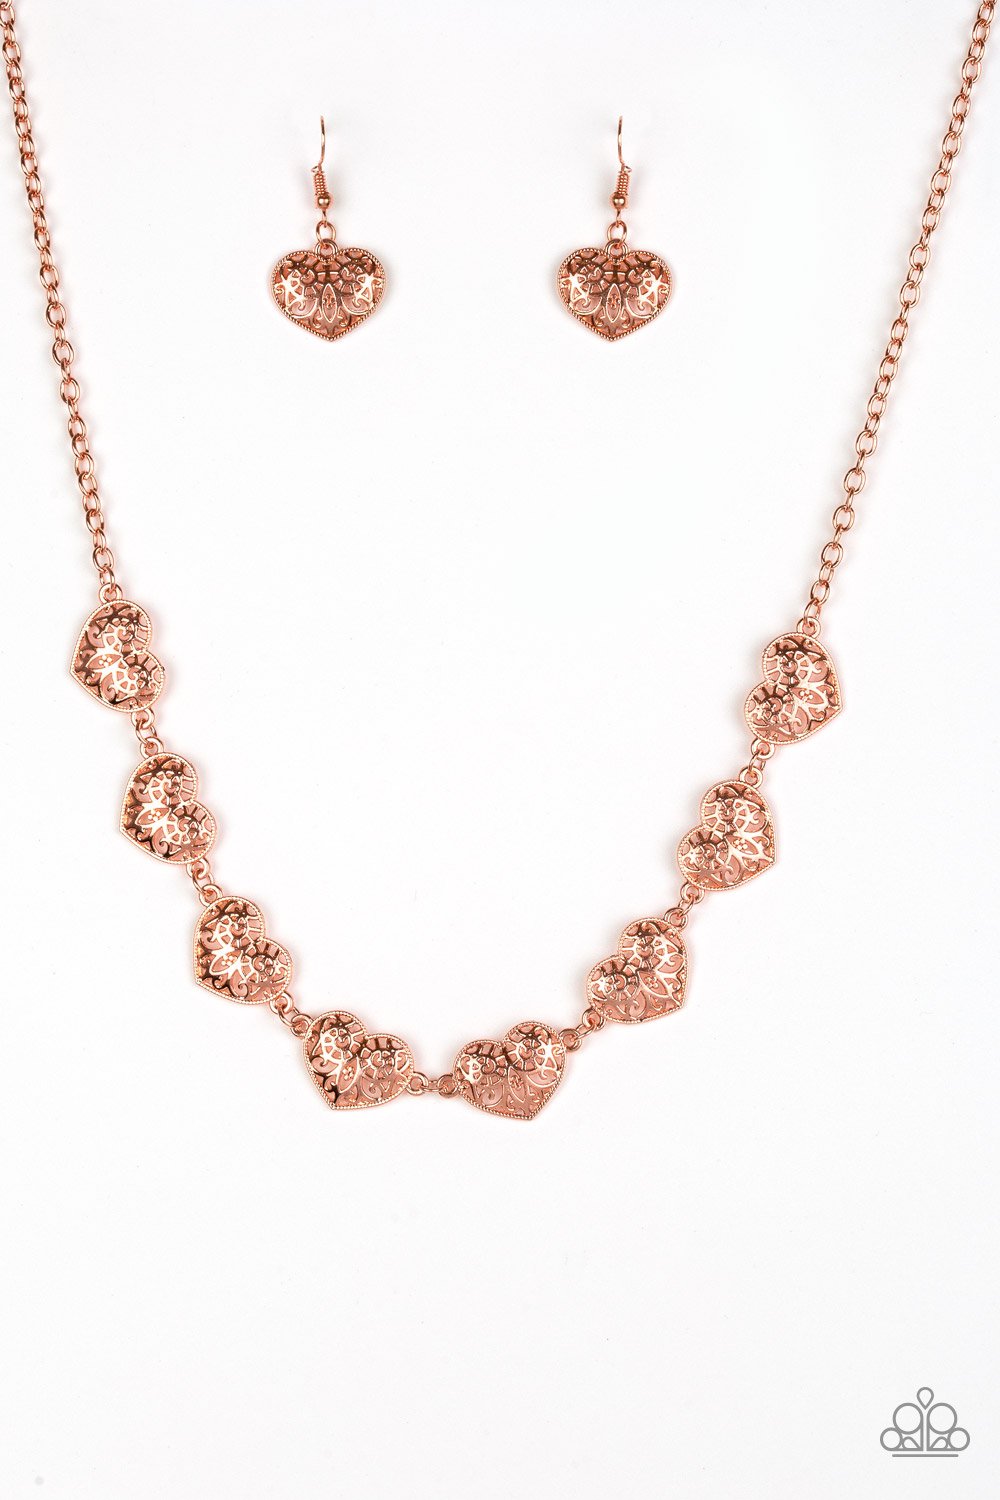 . Easy To Adore - Copper Necklace